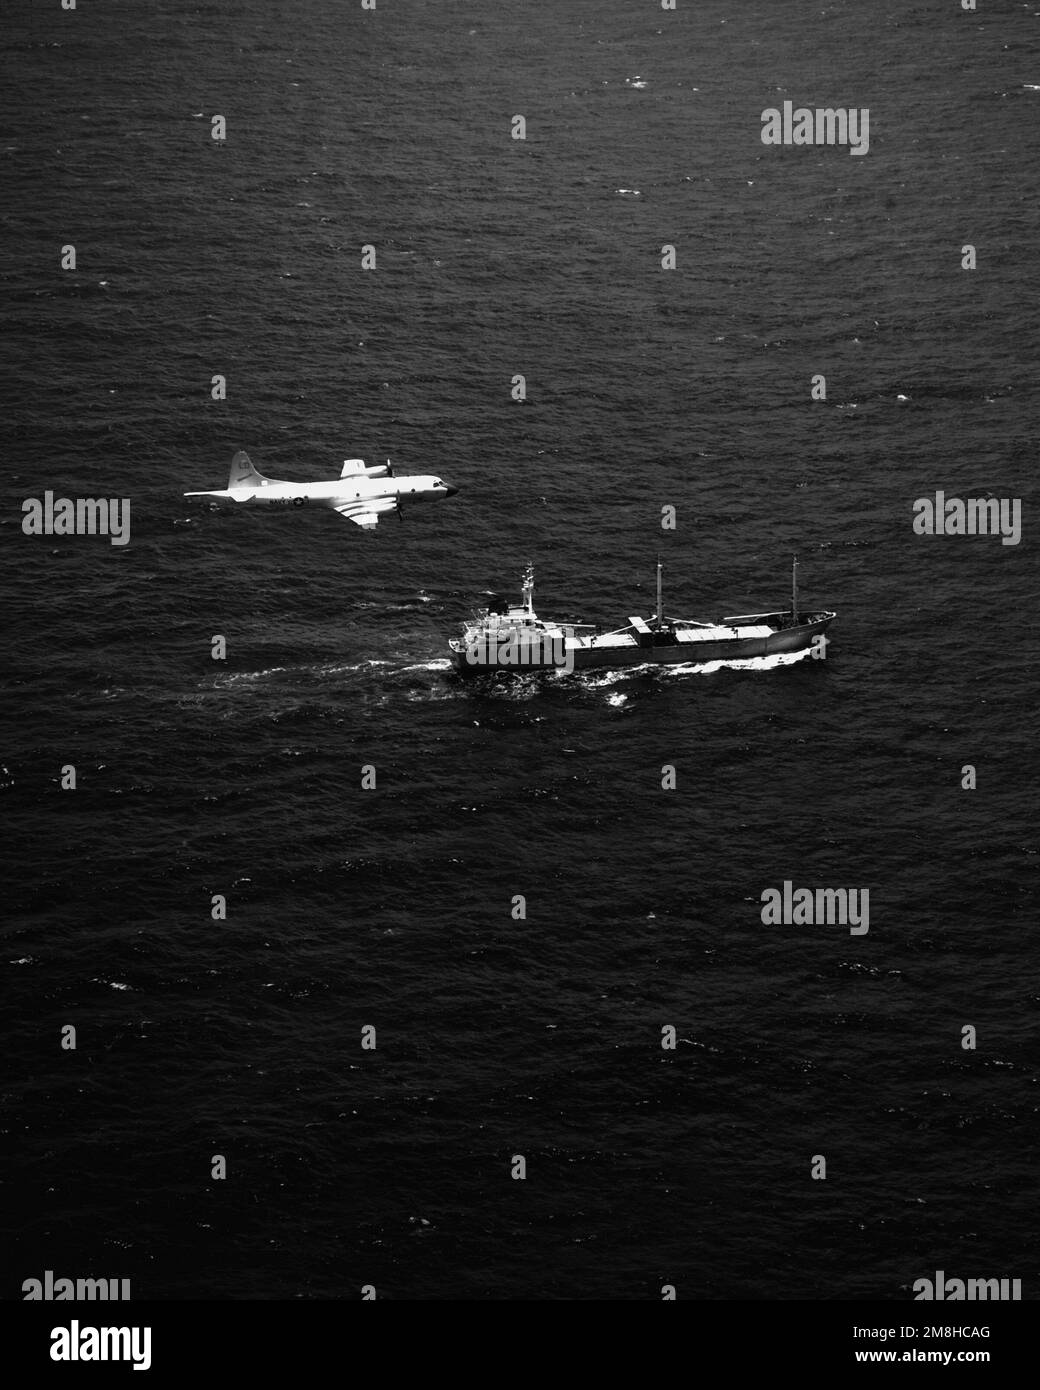 A P-3C Orion aircraft of Patrol Squadron 10 (VP-10) flies over the SS Sea Chariot, a merchant vessel suspected of drug-trafficking activities. Discovered by the patrol squadron's Combat Aircrew Two in the waters southwest of Costa Rica, the ship was found to be carrying II,233 pounds of cocaine when boarded by U.S. Coast Guard personnel. Country: Pacific Ocean (POC) Stock Photo